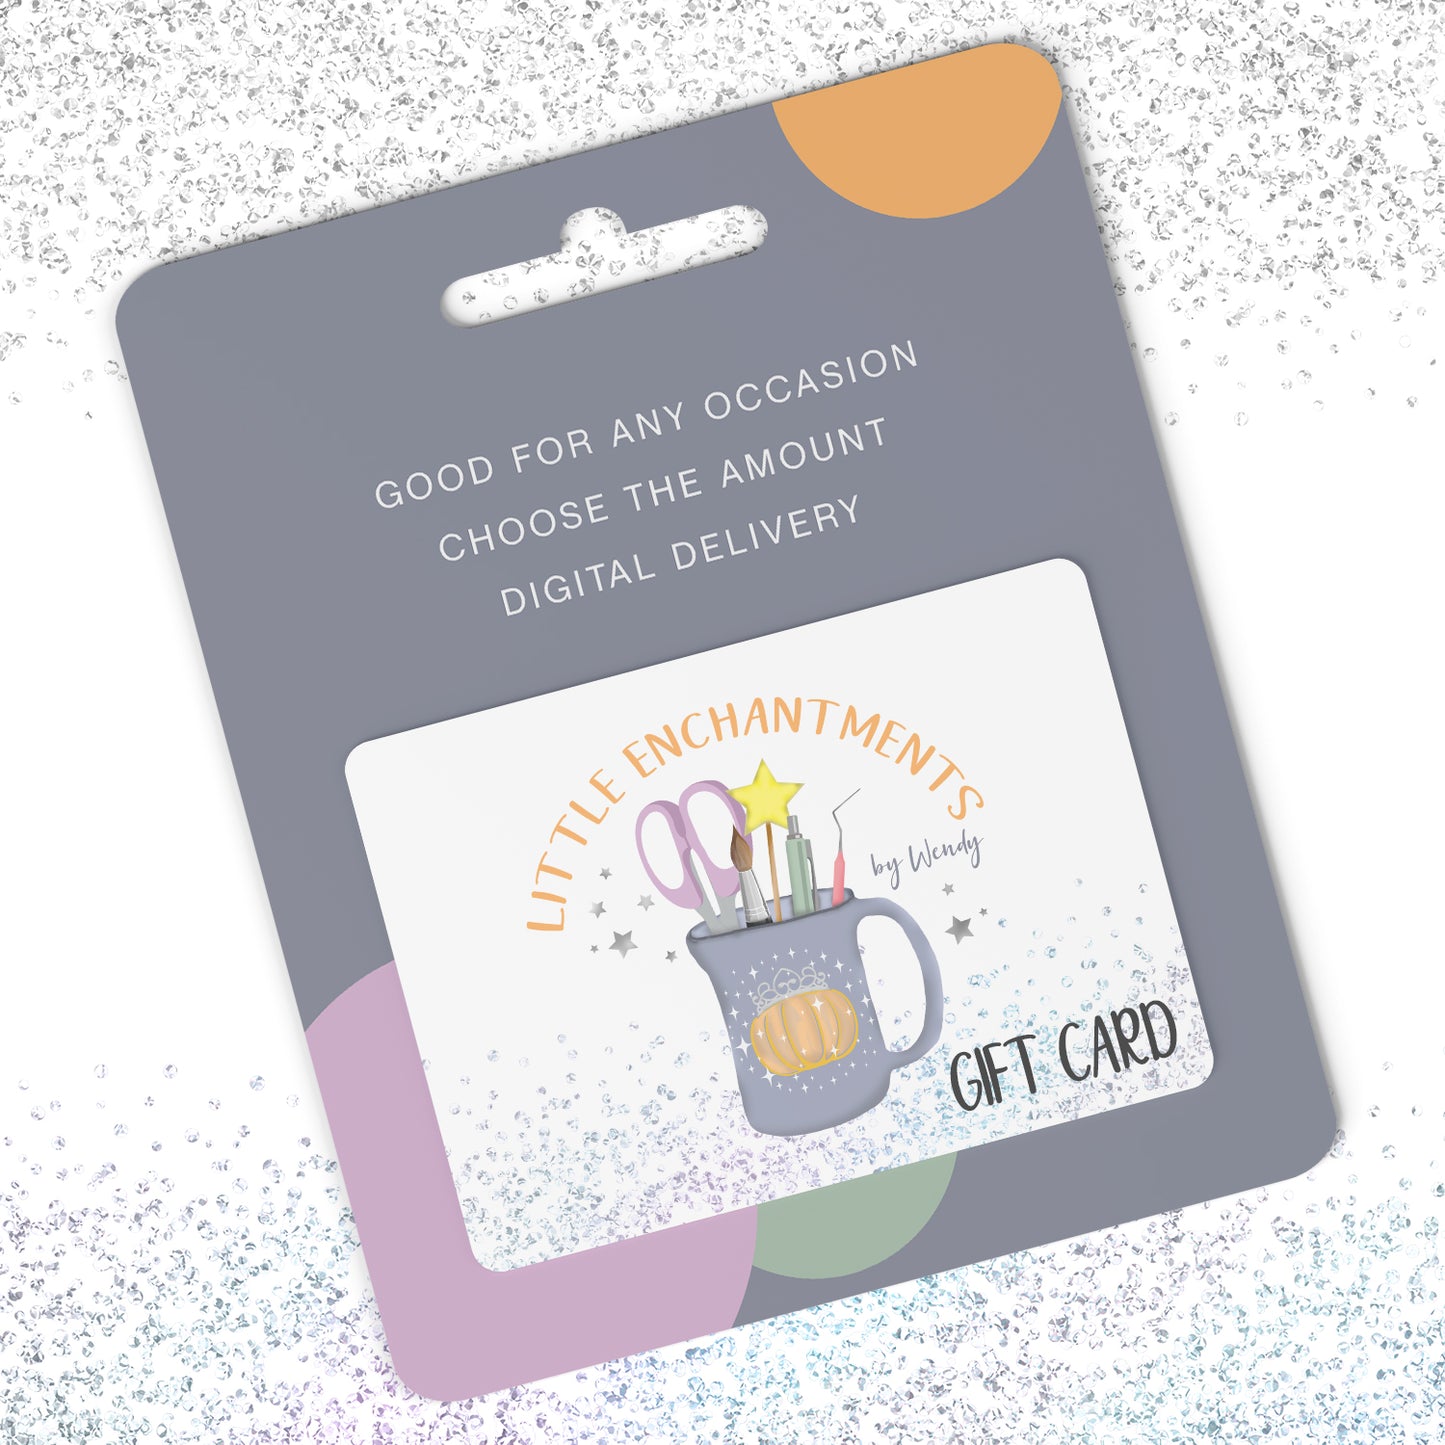 Little Enchantments by Wendy Gift Card